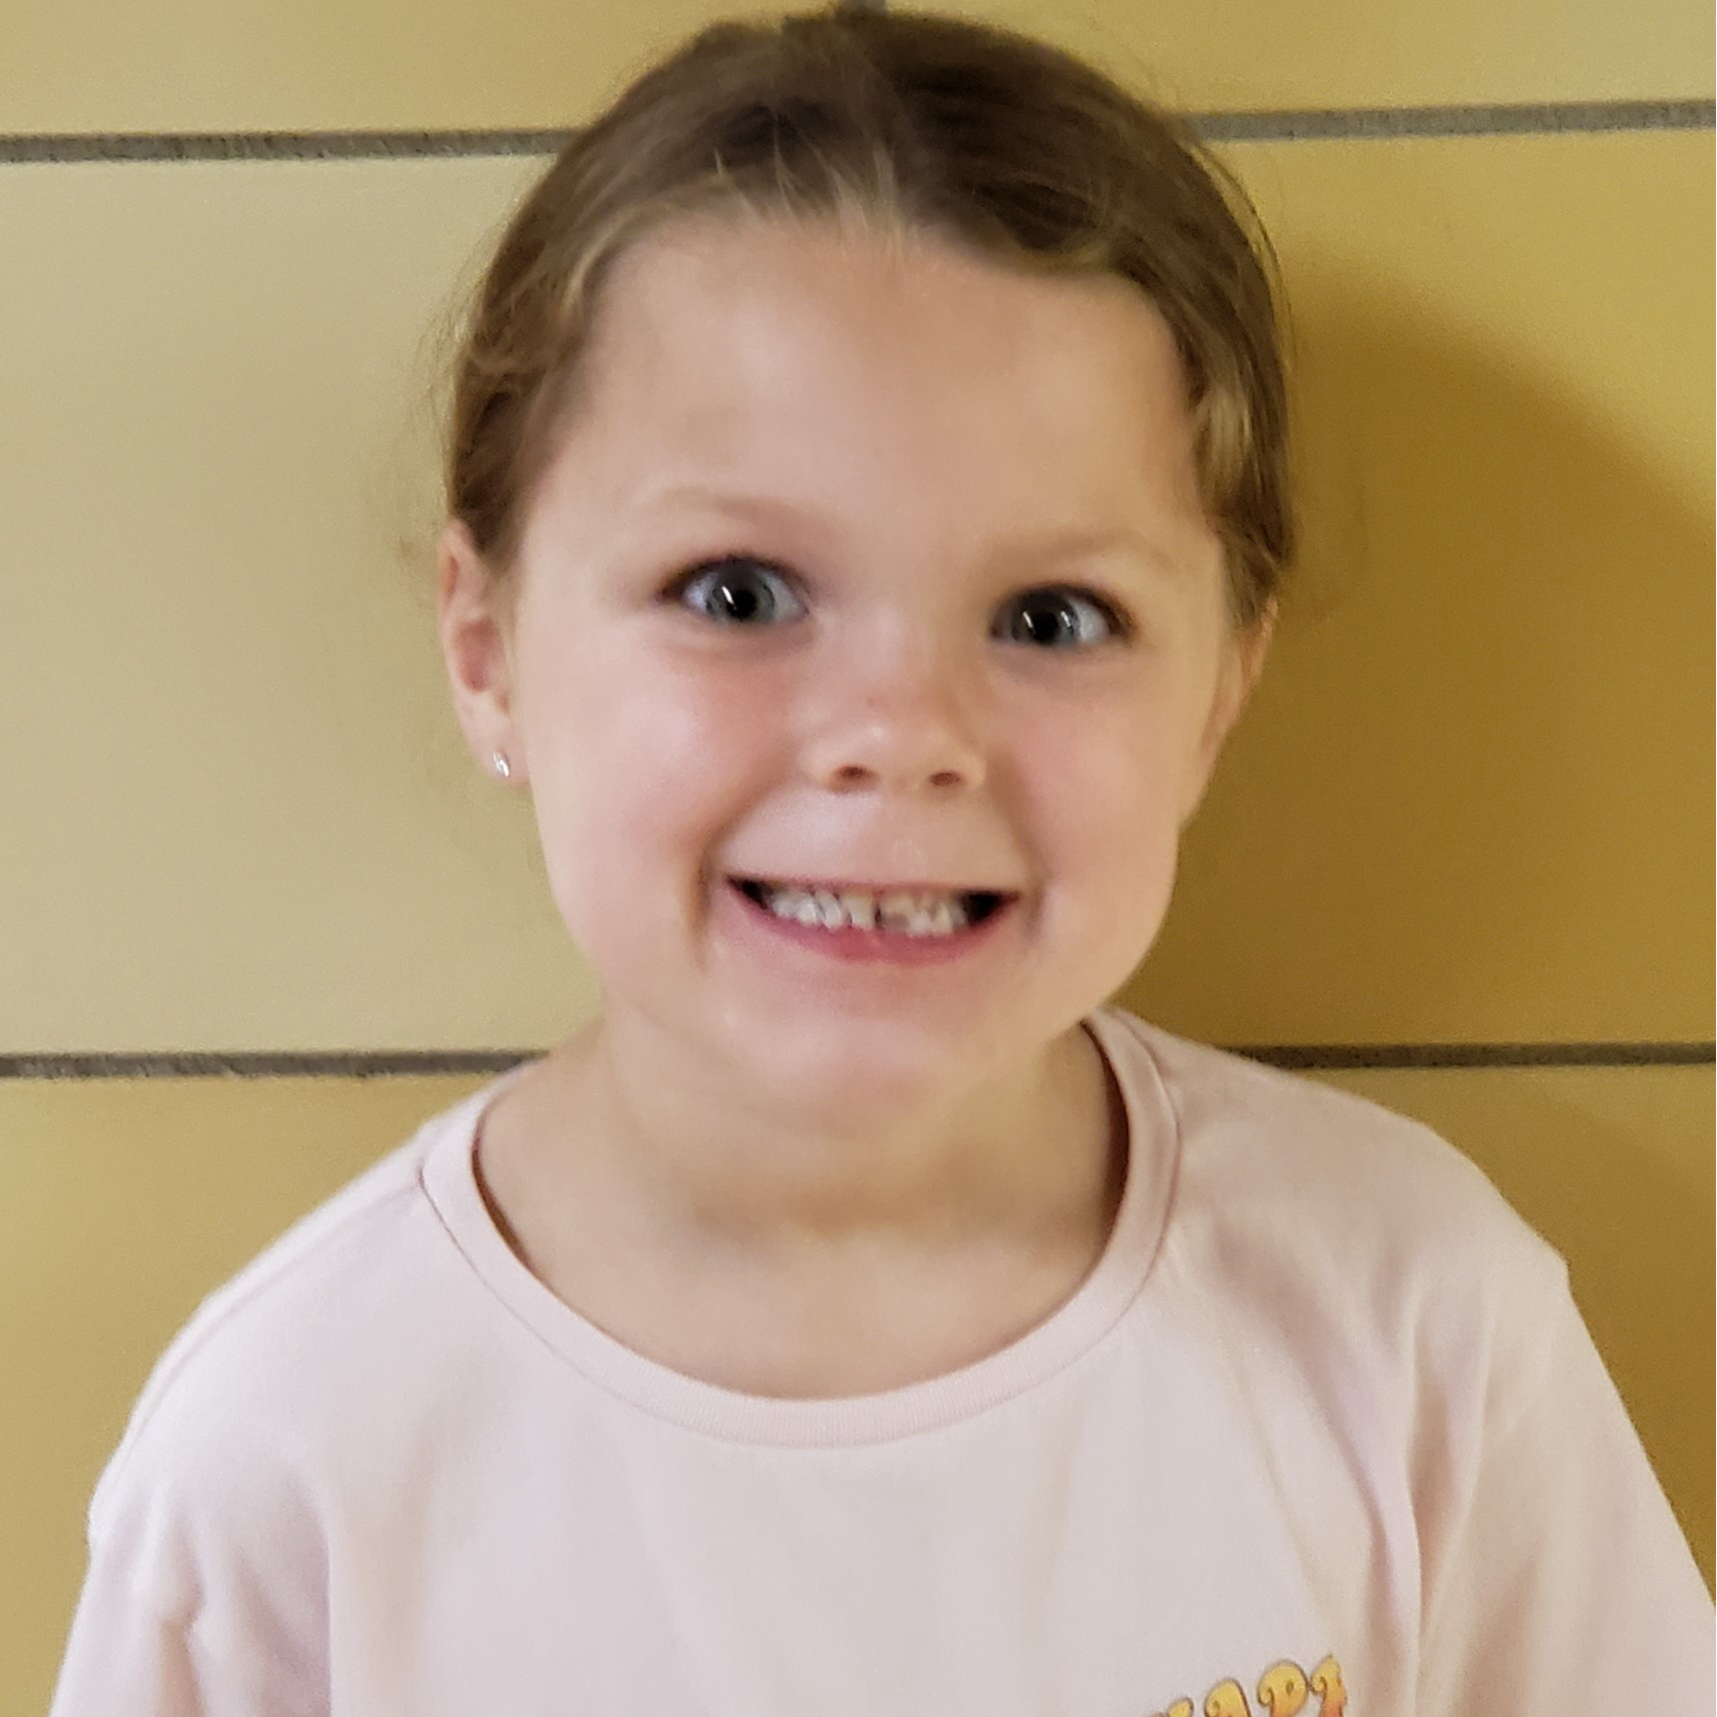 smiling young girl missing a front tooth with light brown hair pulled back wearing a light pink t-shirt